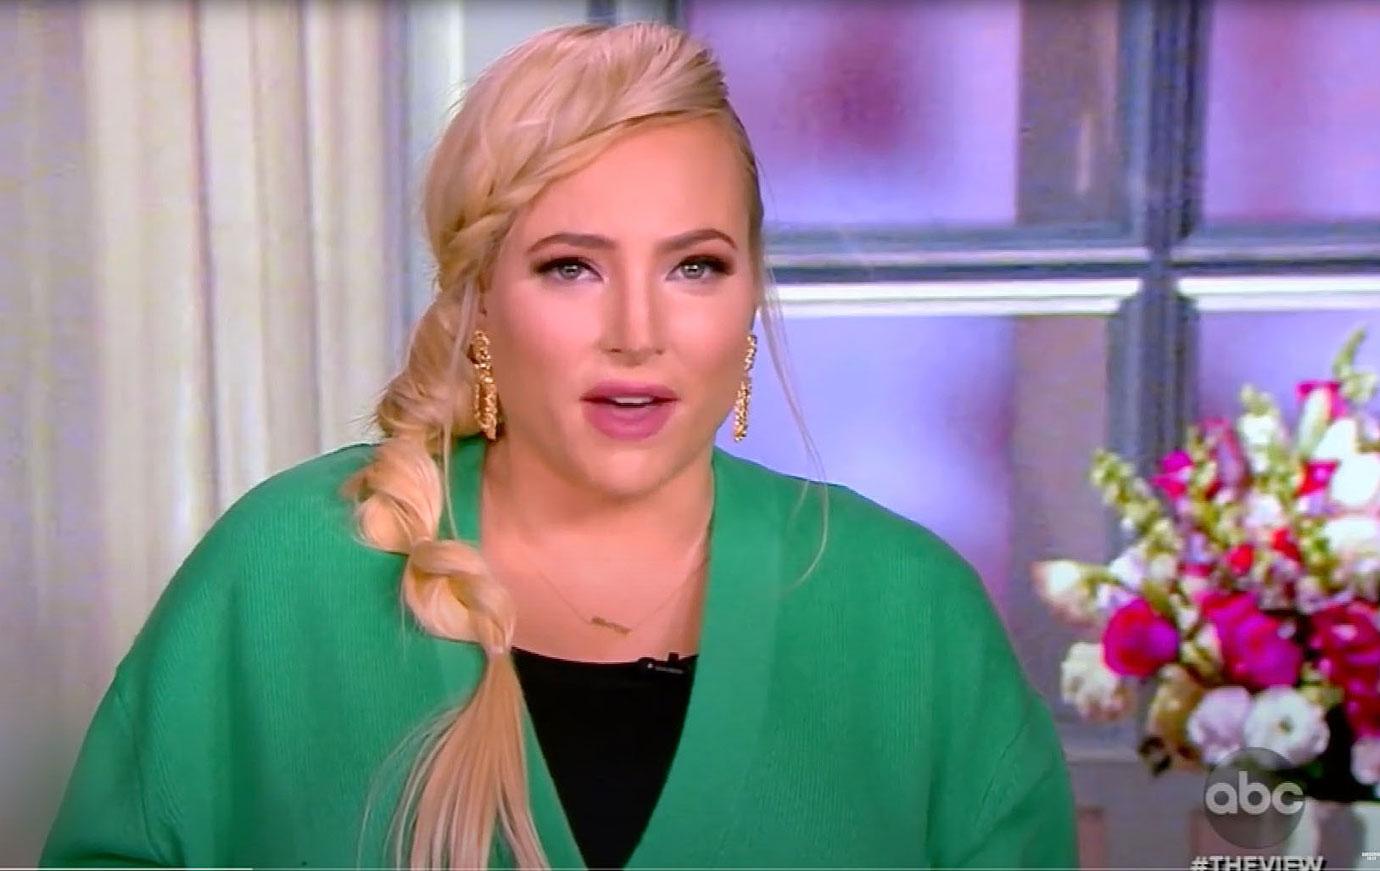 Meghan mccain sexy pictures